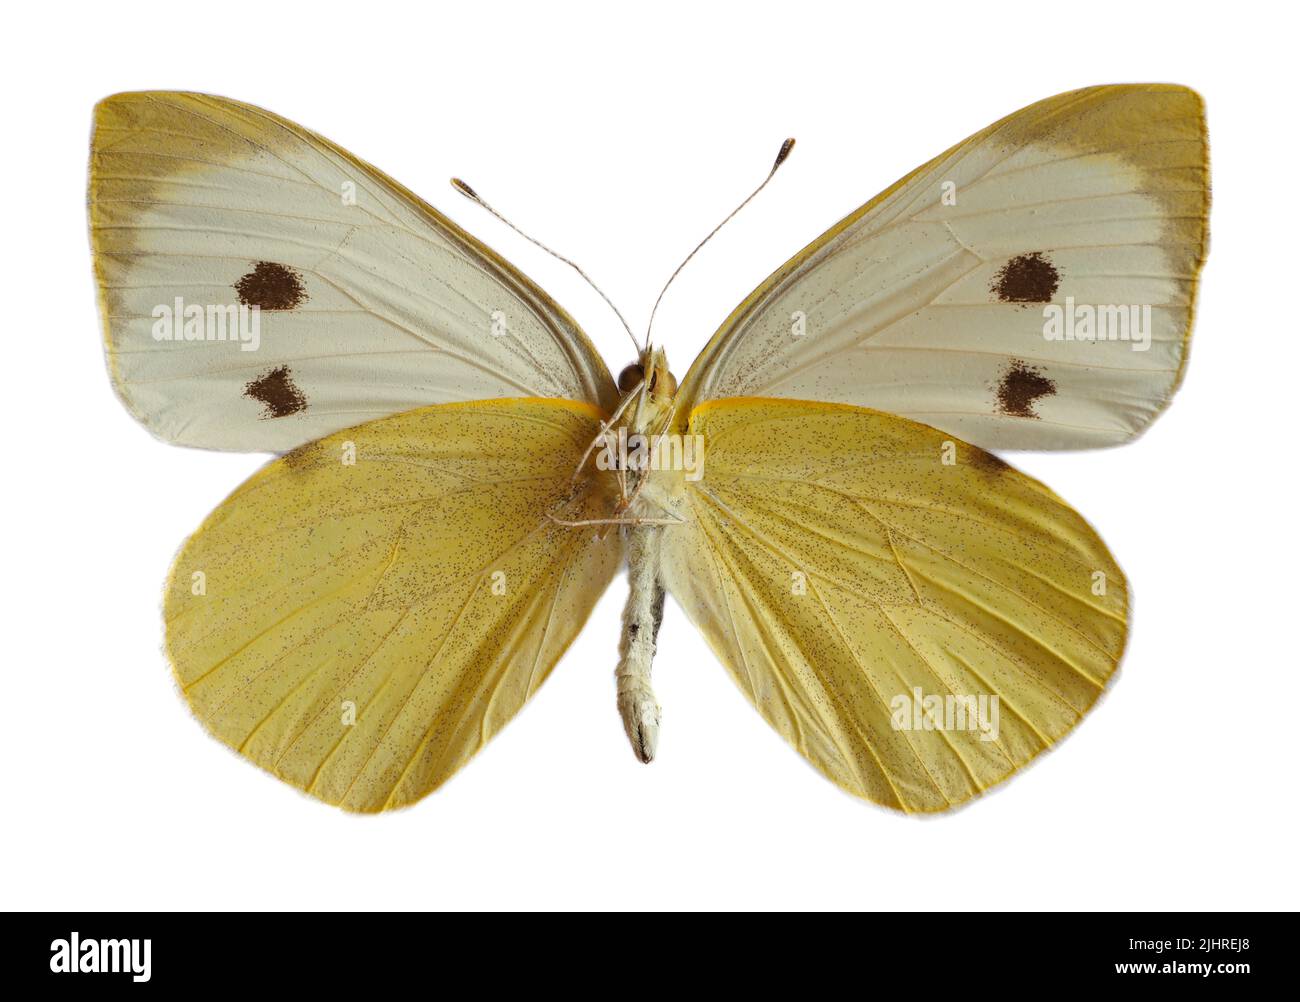 Female large white butterfly, also called Cabbage Butterfly or Cabbage White (Pieris brassicae), open wings and seen from below isolated on white back Stock Photo